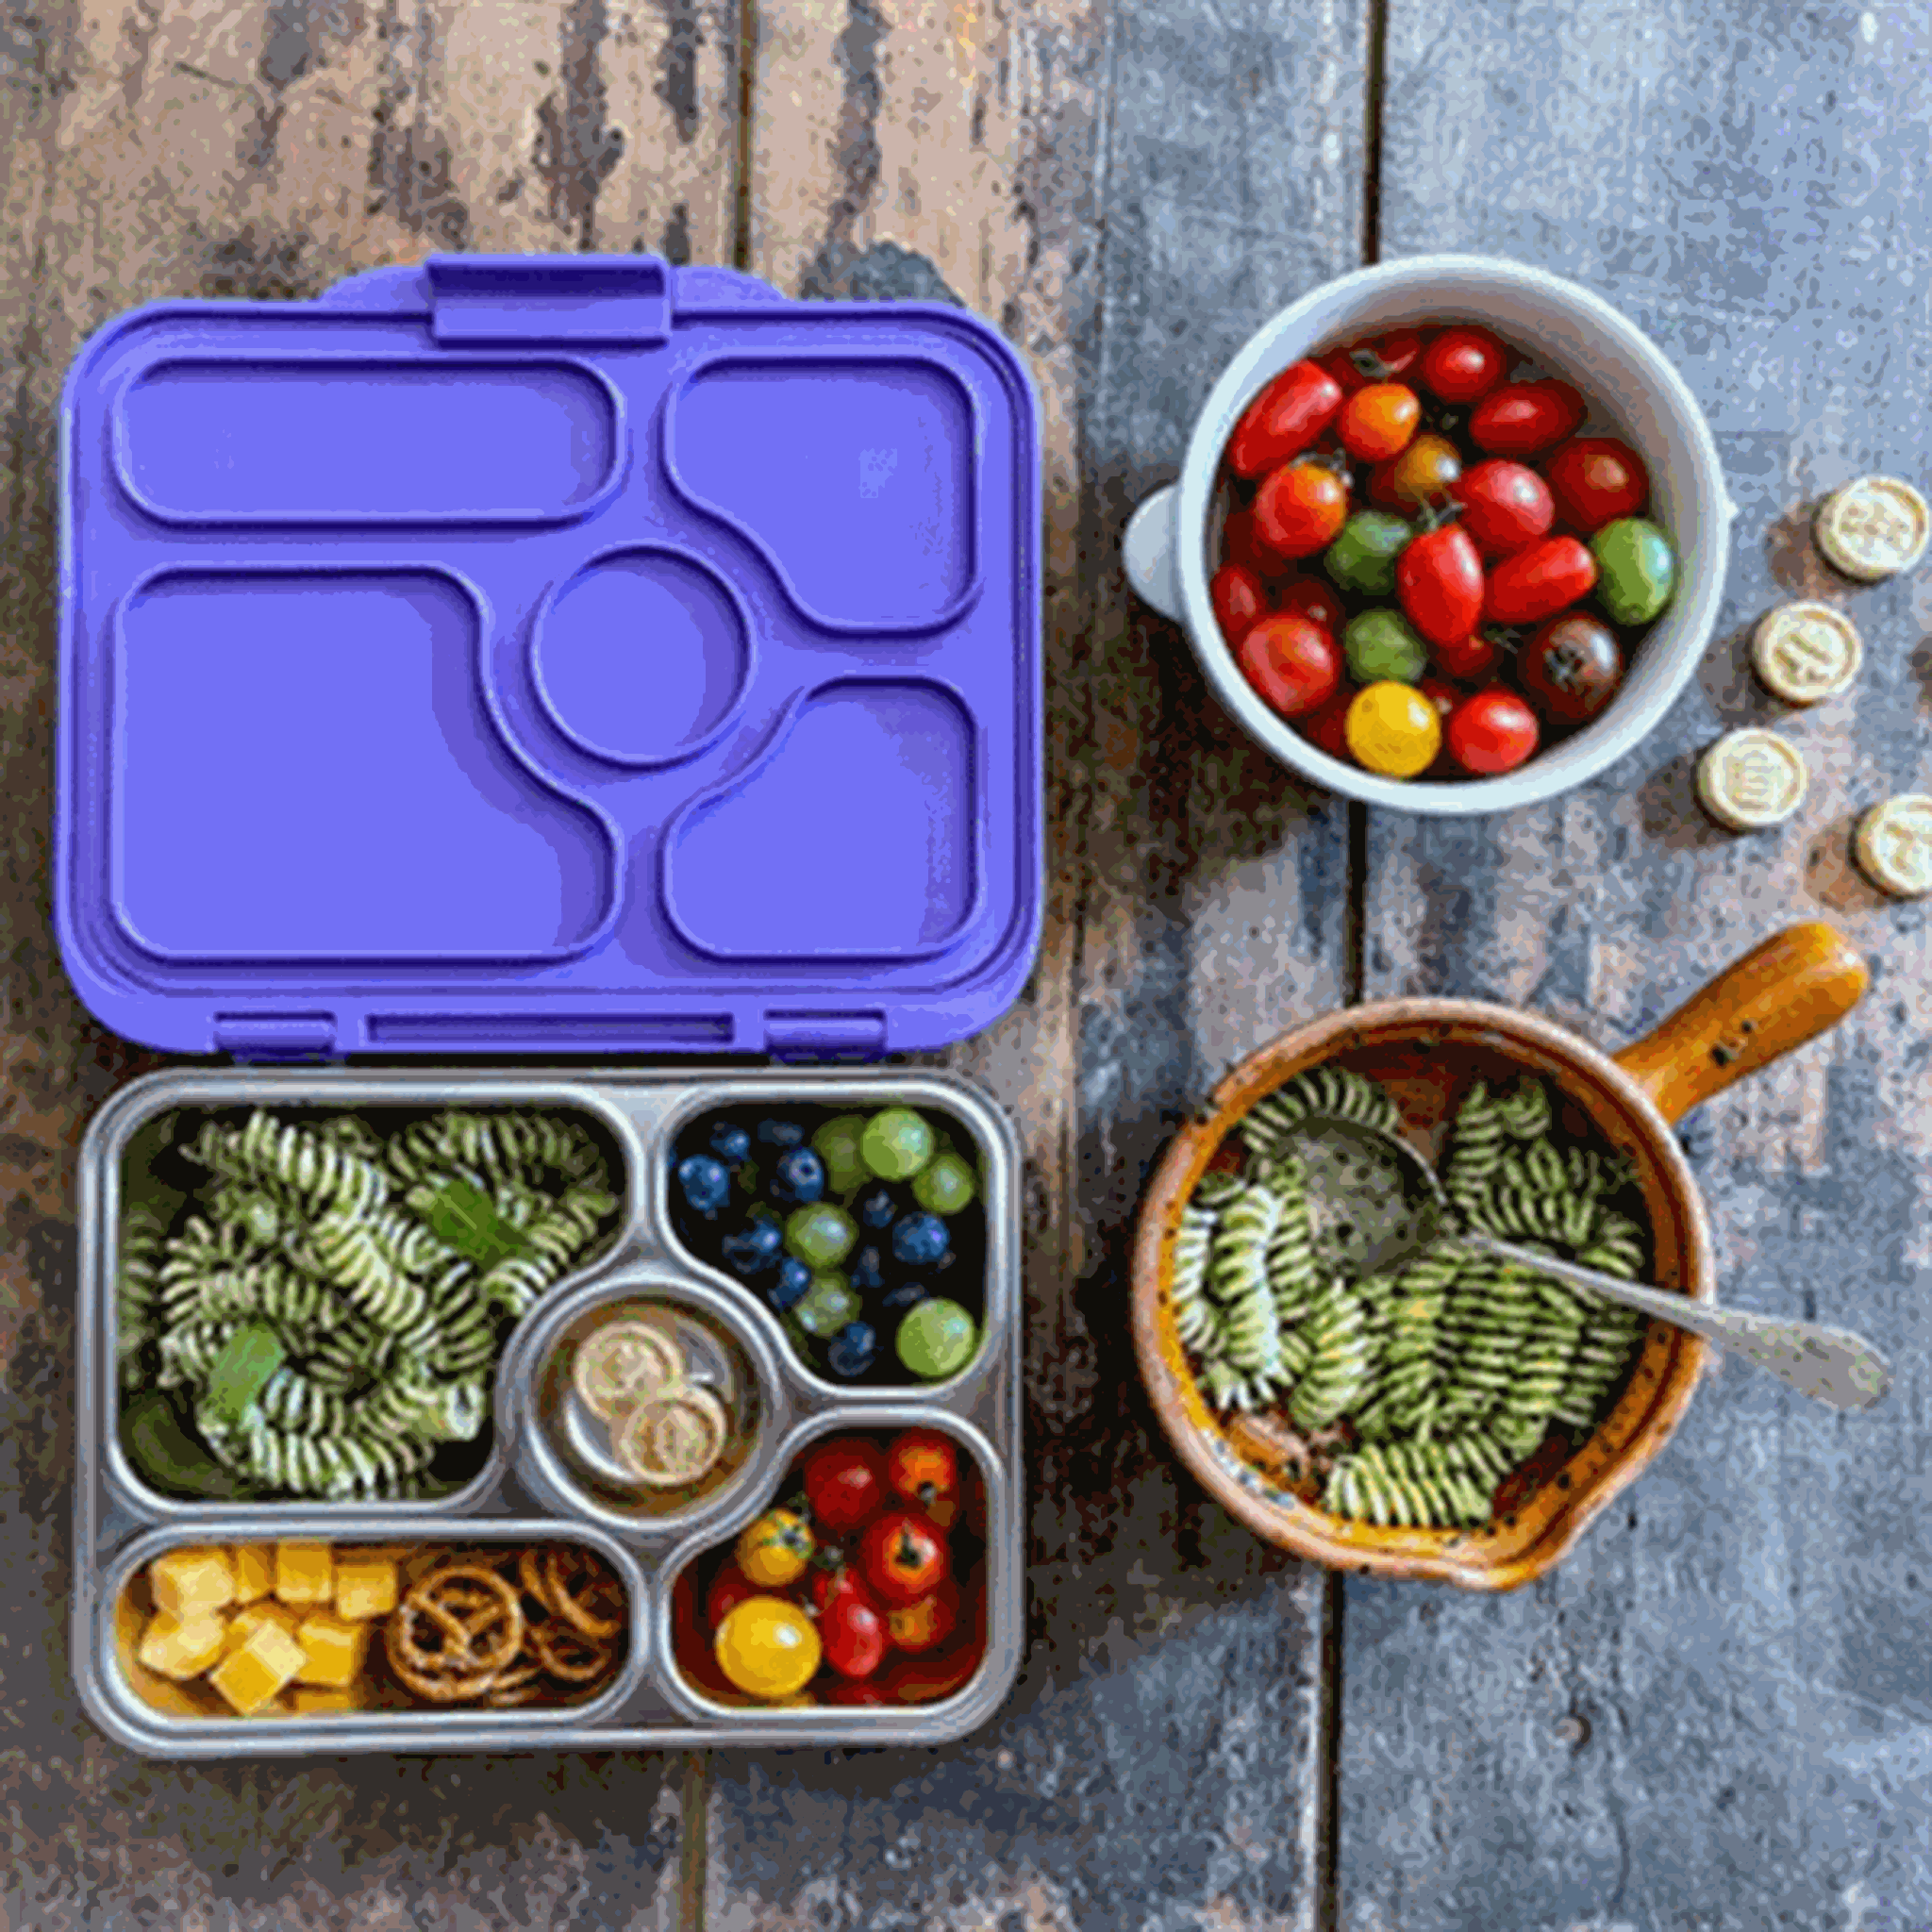 Yumbox Presto Stainless Steel Lunch Box Remy Lavender 3